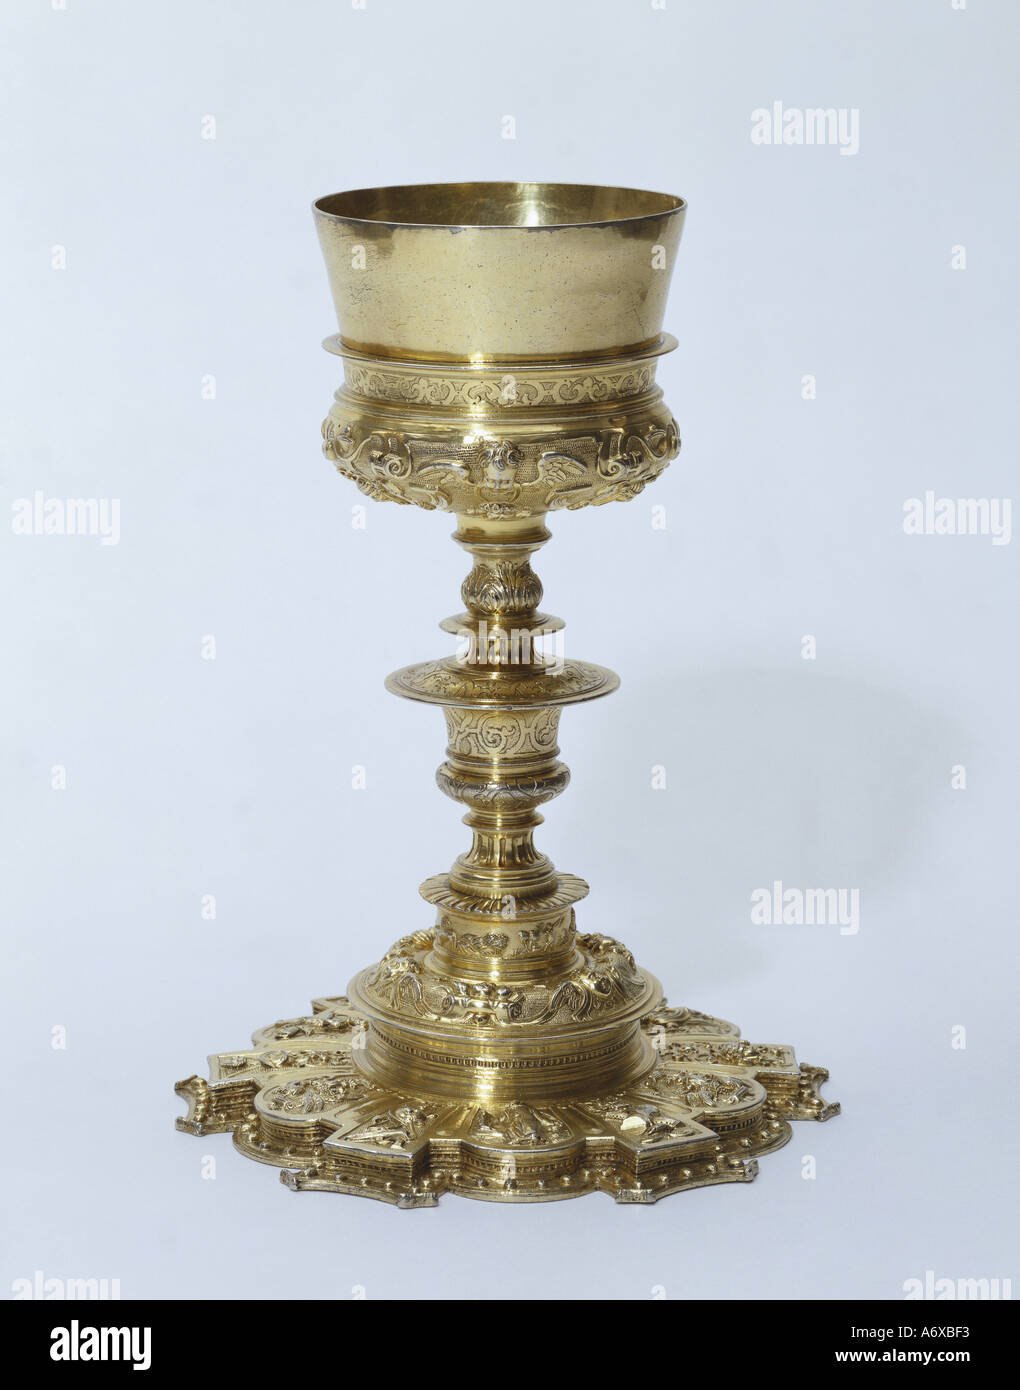 Silver Chalice. Spain, mid 16th century. Stock Photo